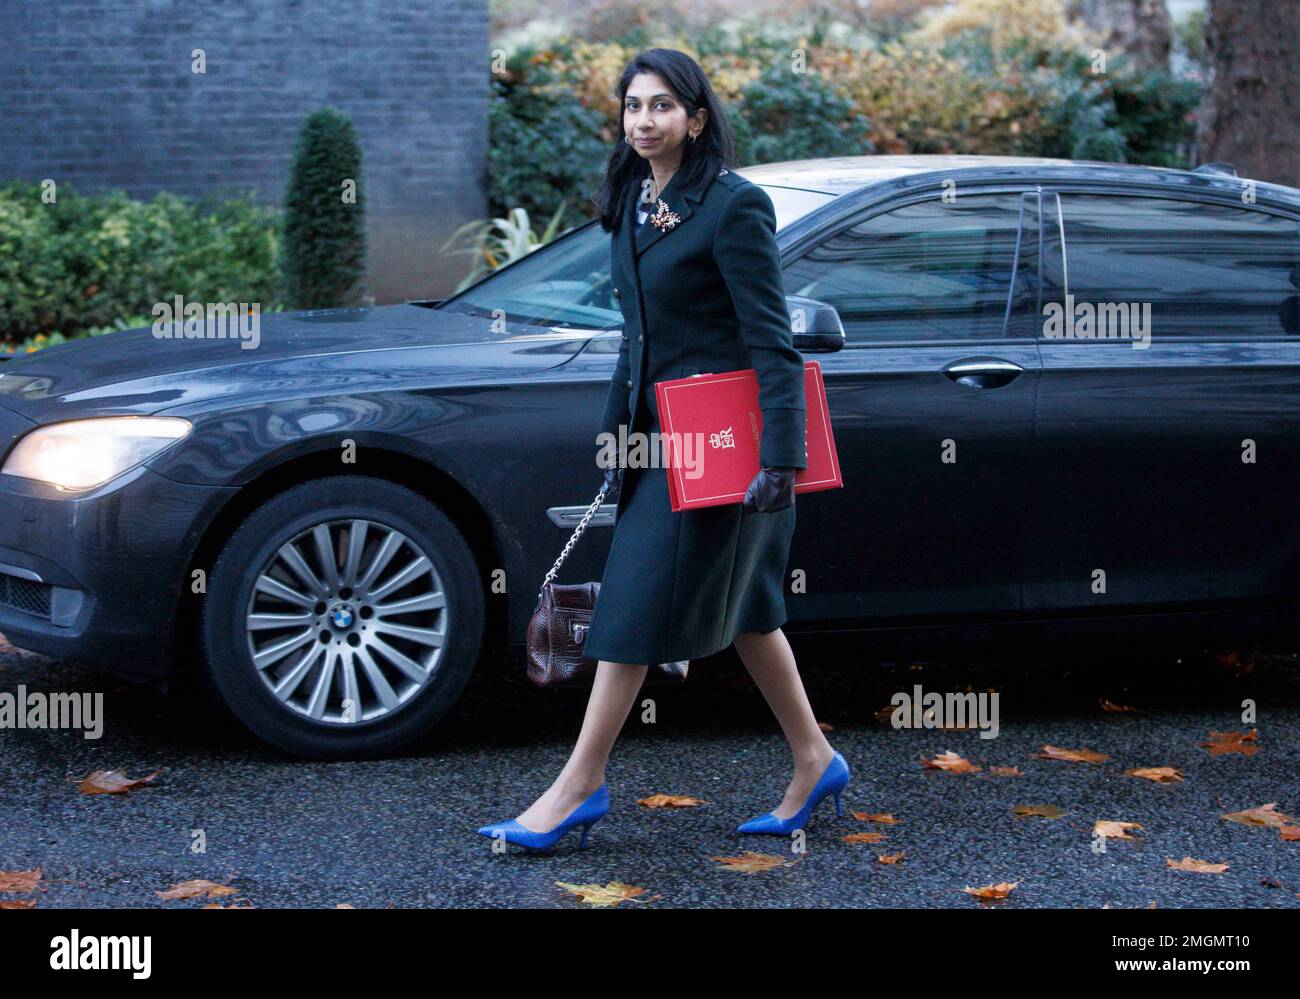 Suella Braverman, Home Secretary, in Downing street. She has been addressing the problem of migrants crossing the Channel. Stock Photo